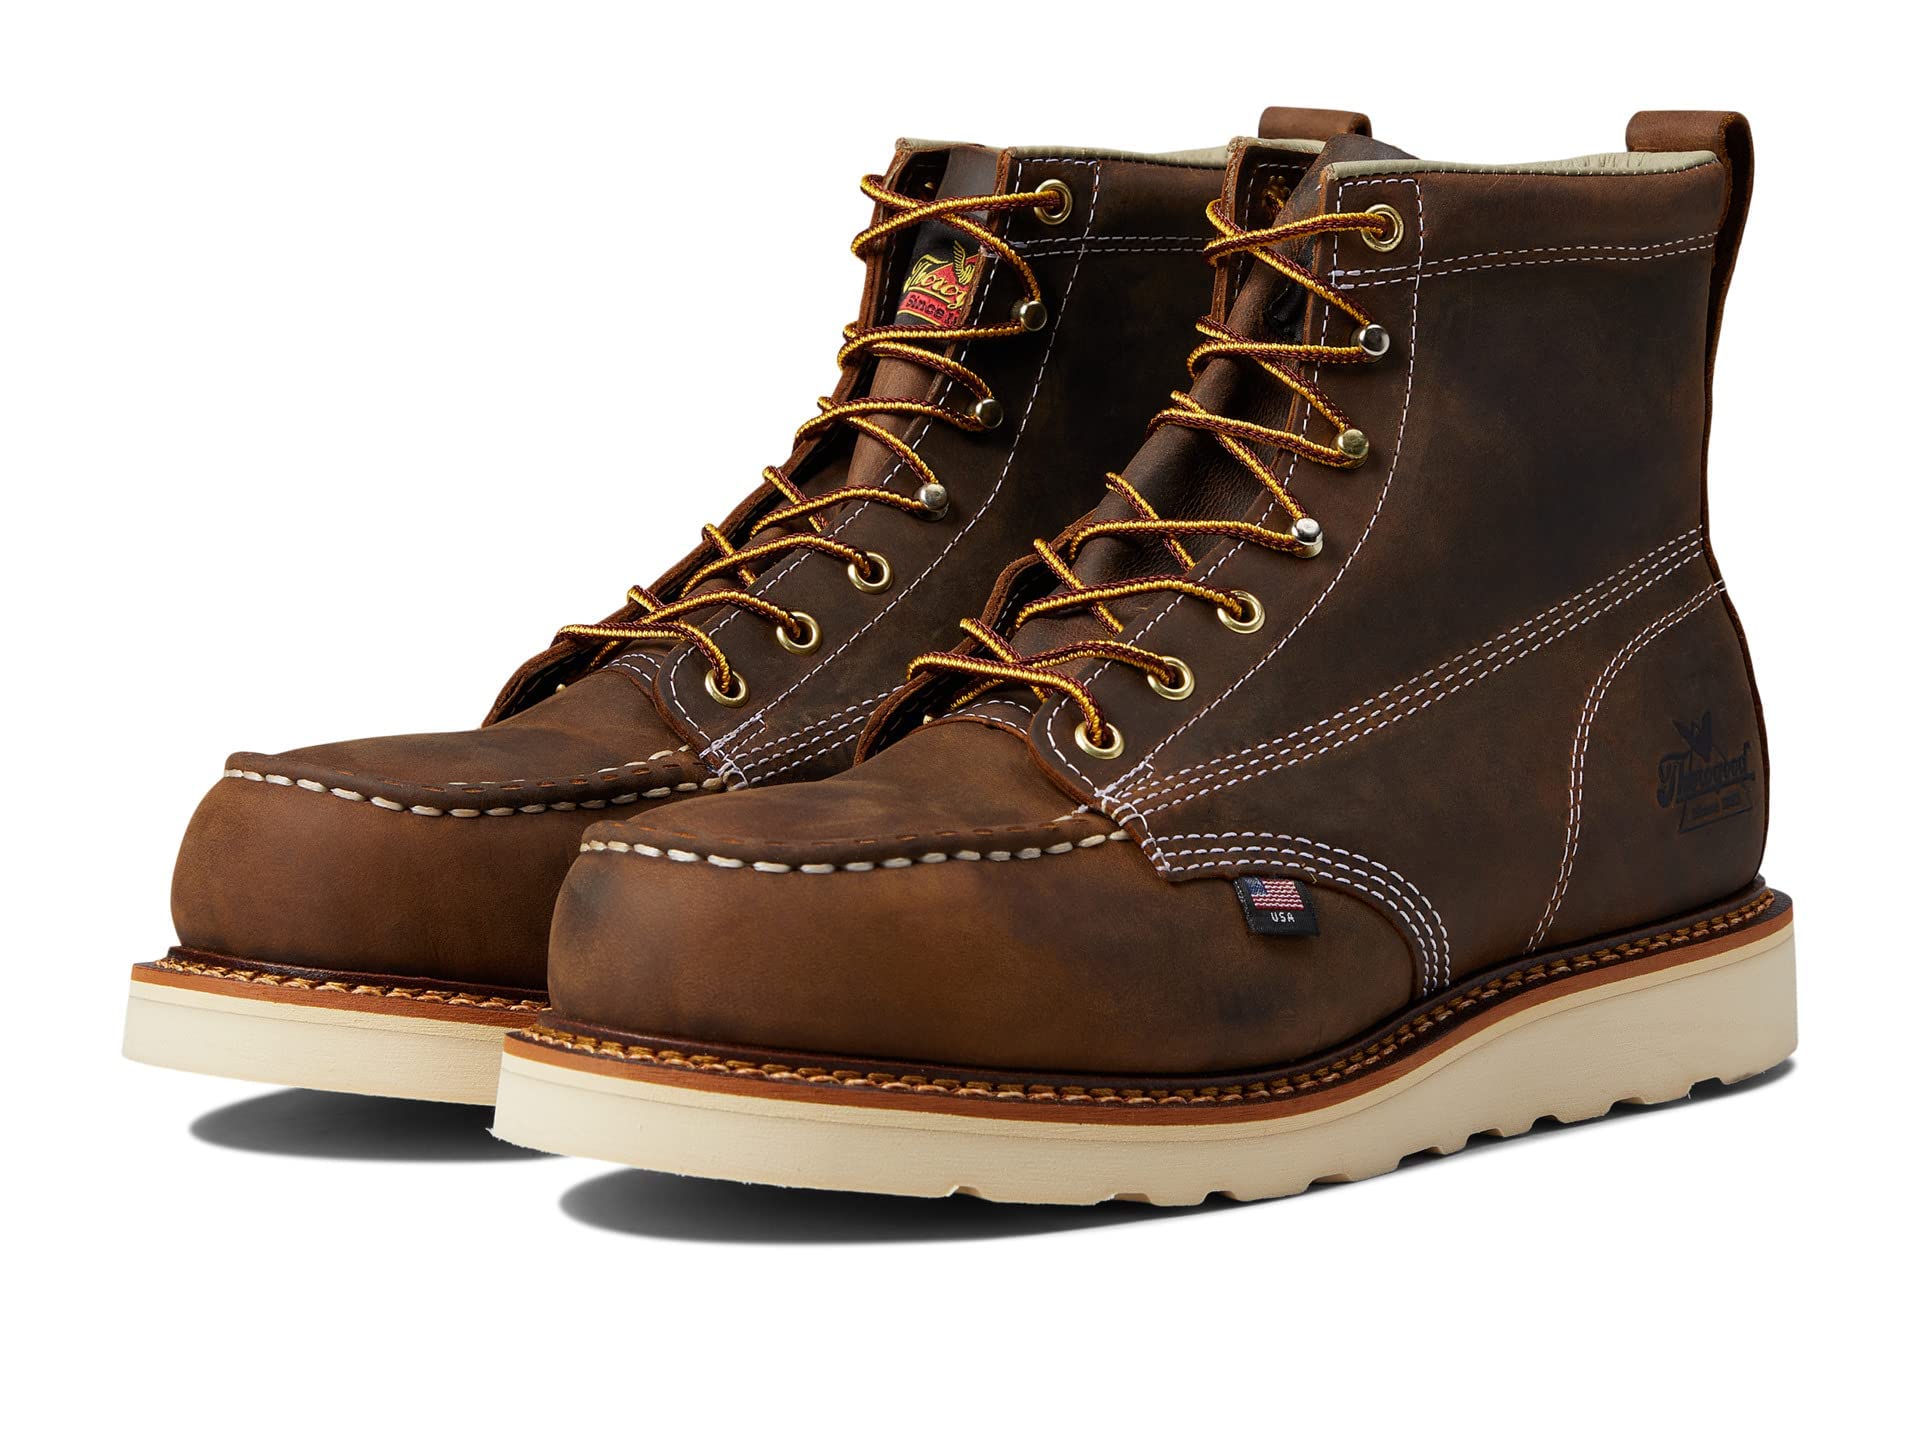 Thorogood American Heritage 6” Steel Toe Work Boots for Men - Full-Grain Leather with Moc Toe, Slip-Resistant Wedge Outsole, and Comfort Insole; EH Rated